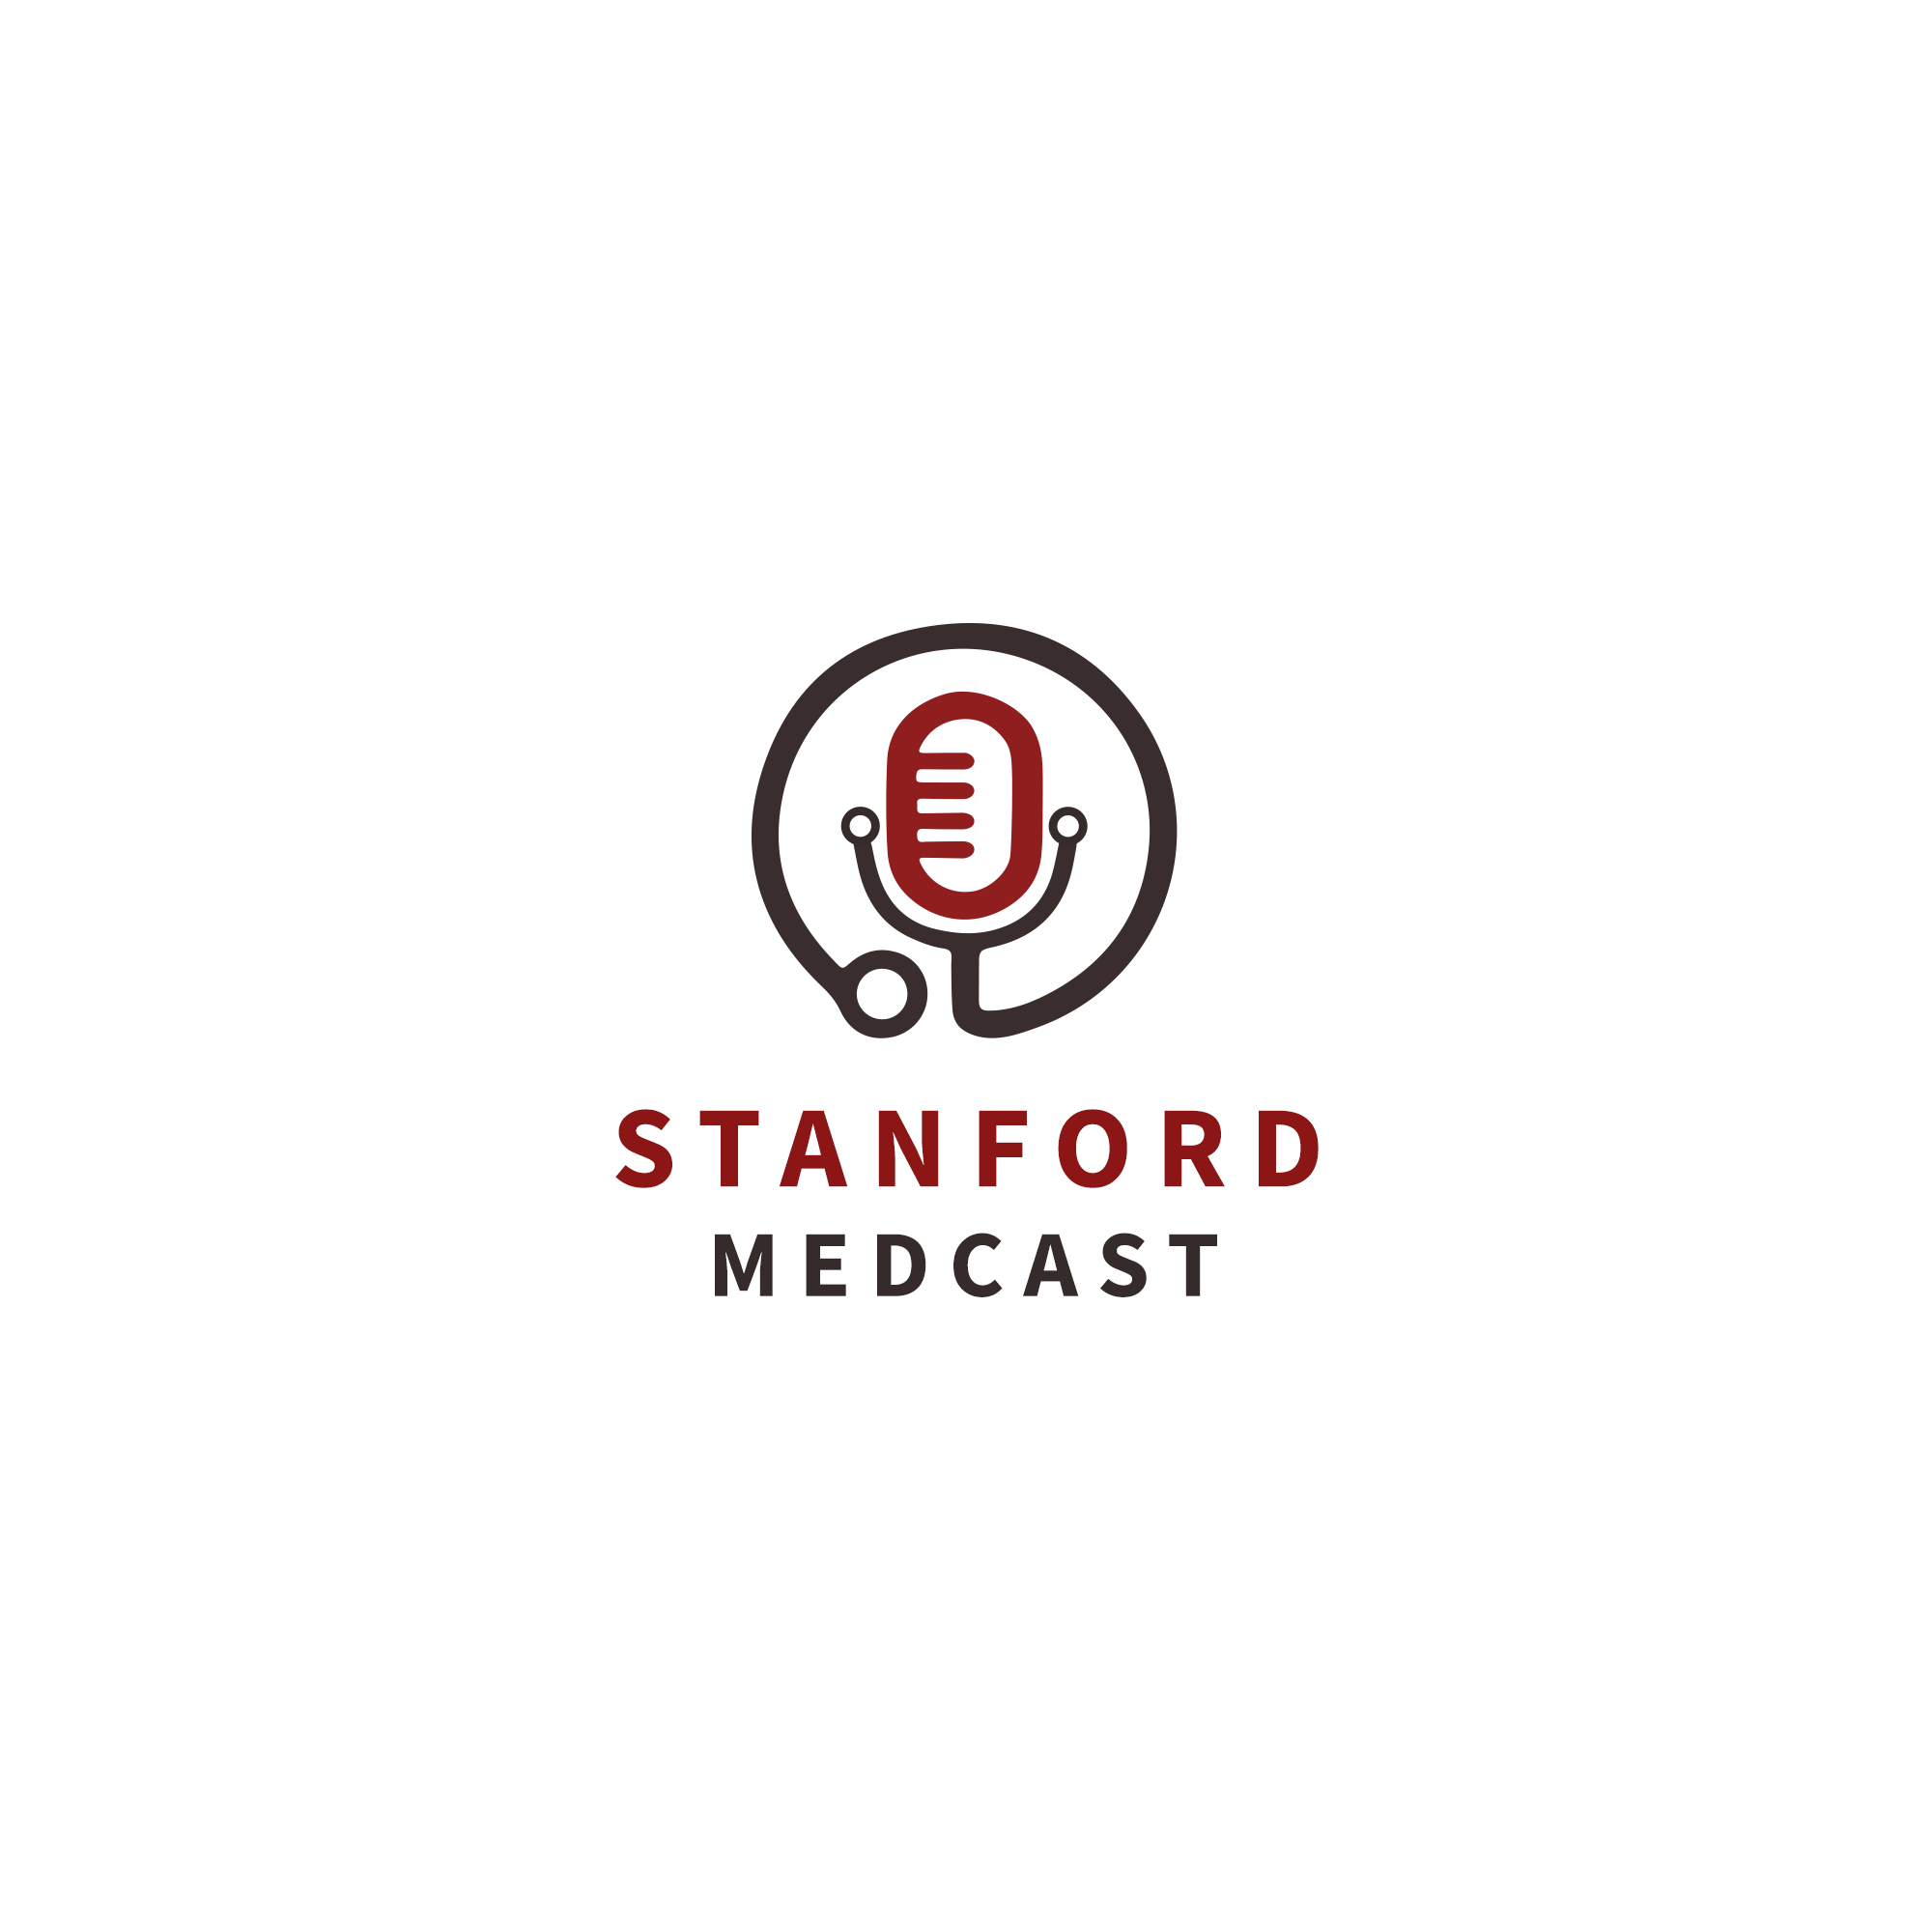 Stanford Medcast Episode 44: Hot Topics Mini-Series - Trending Clinical Topics: Monkeypox & Ramsay Hunt Syndrome Banner